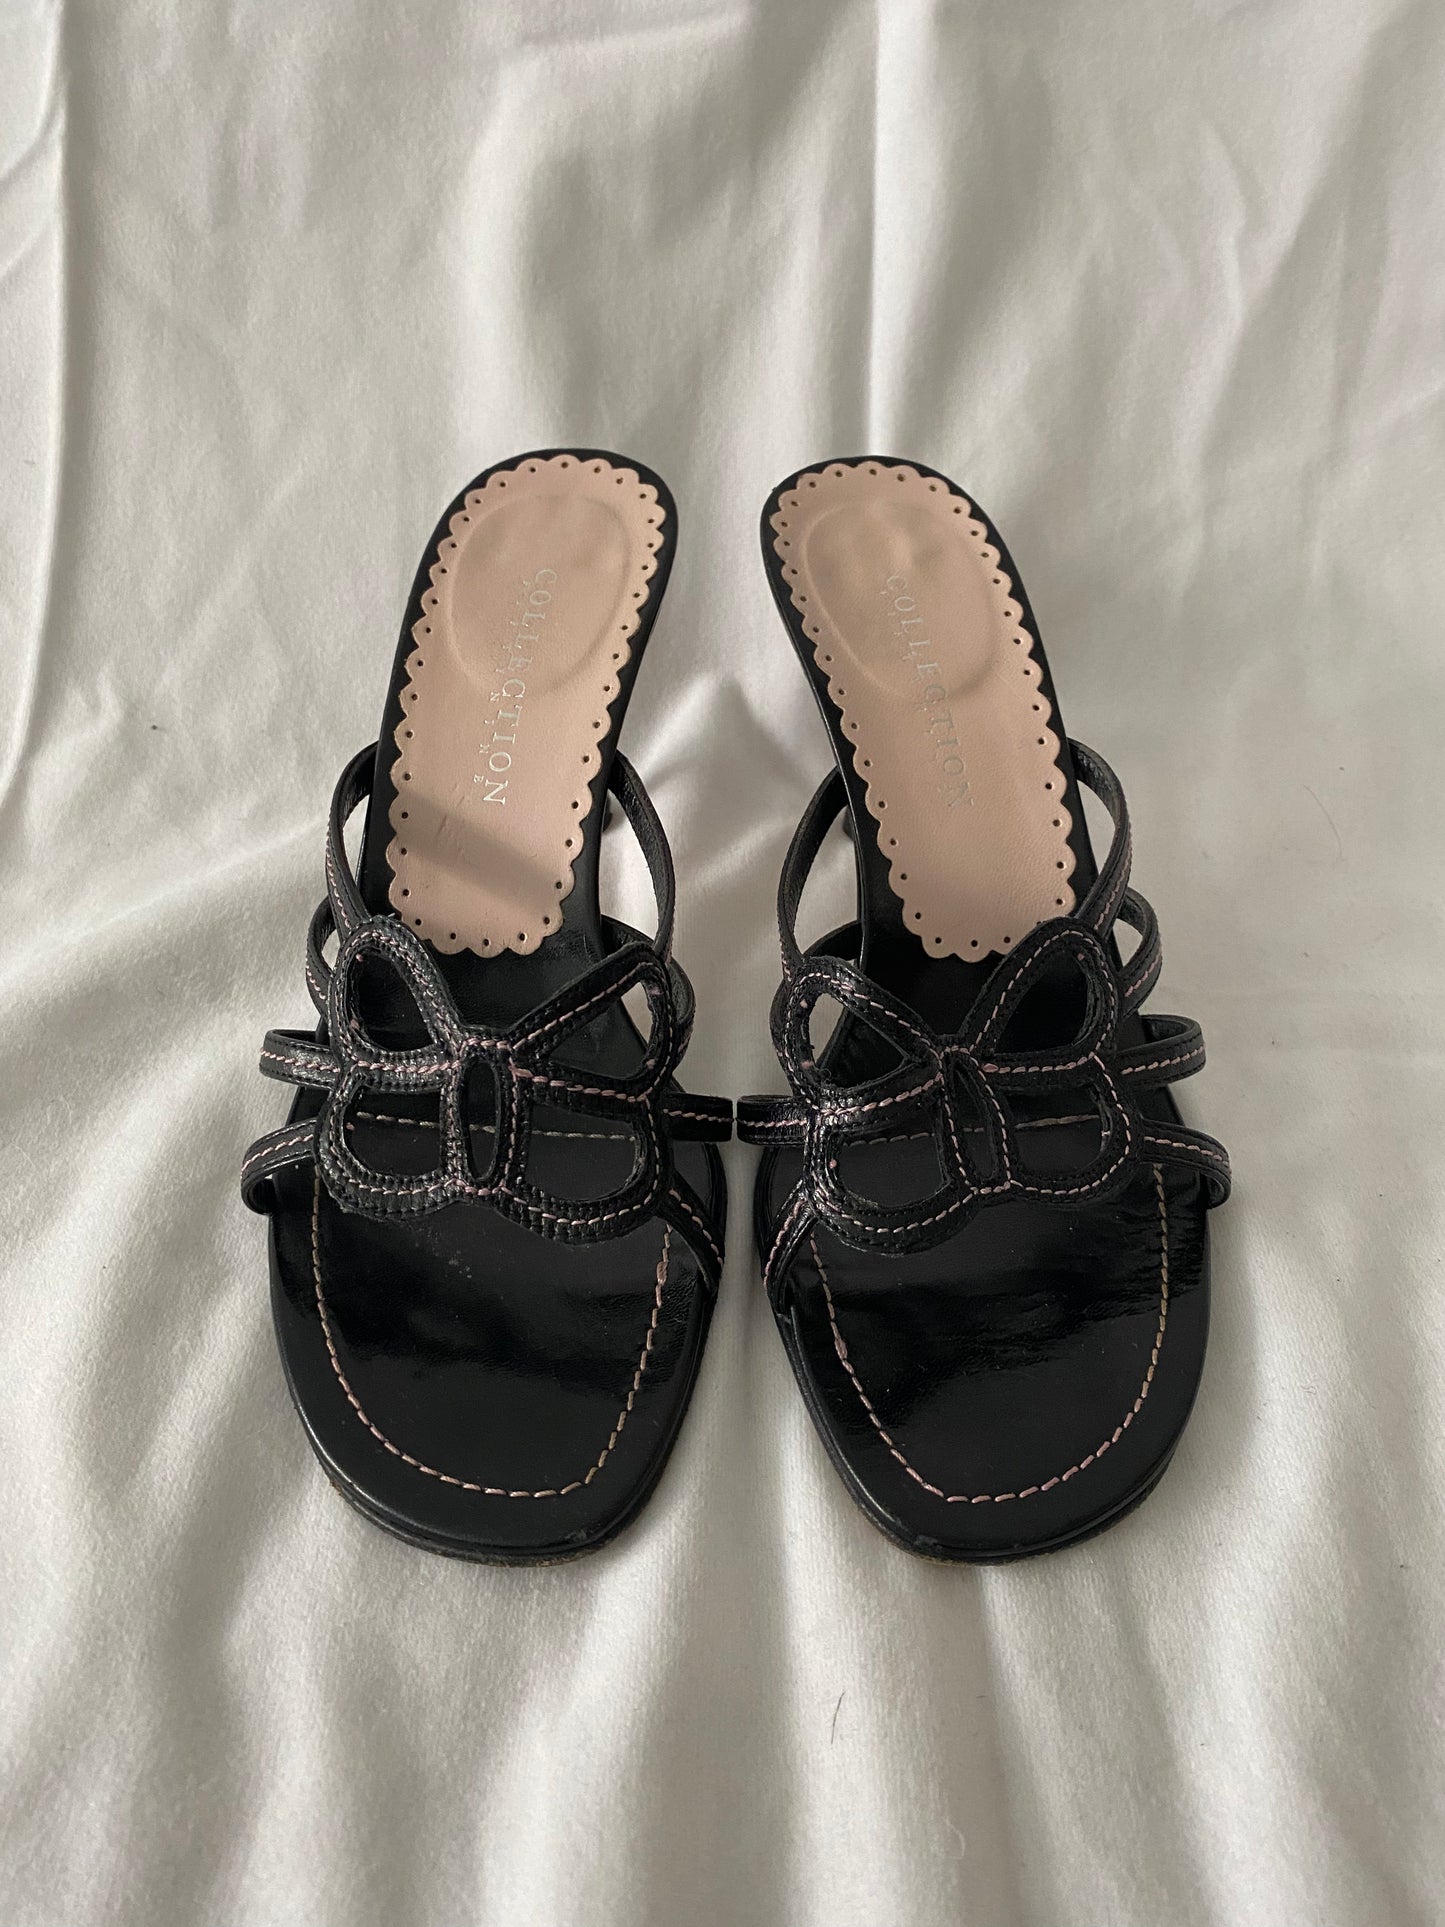 Vintage '90s Butterfly Sandals